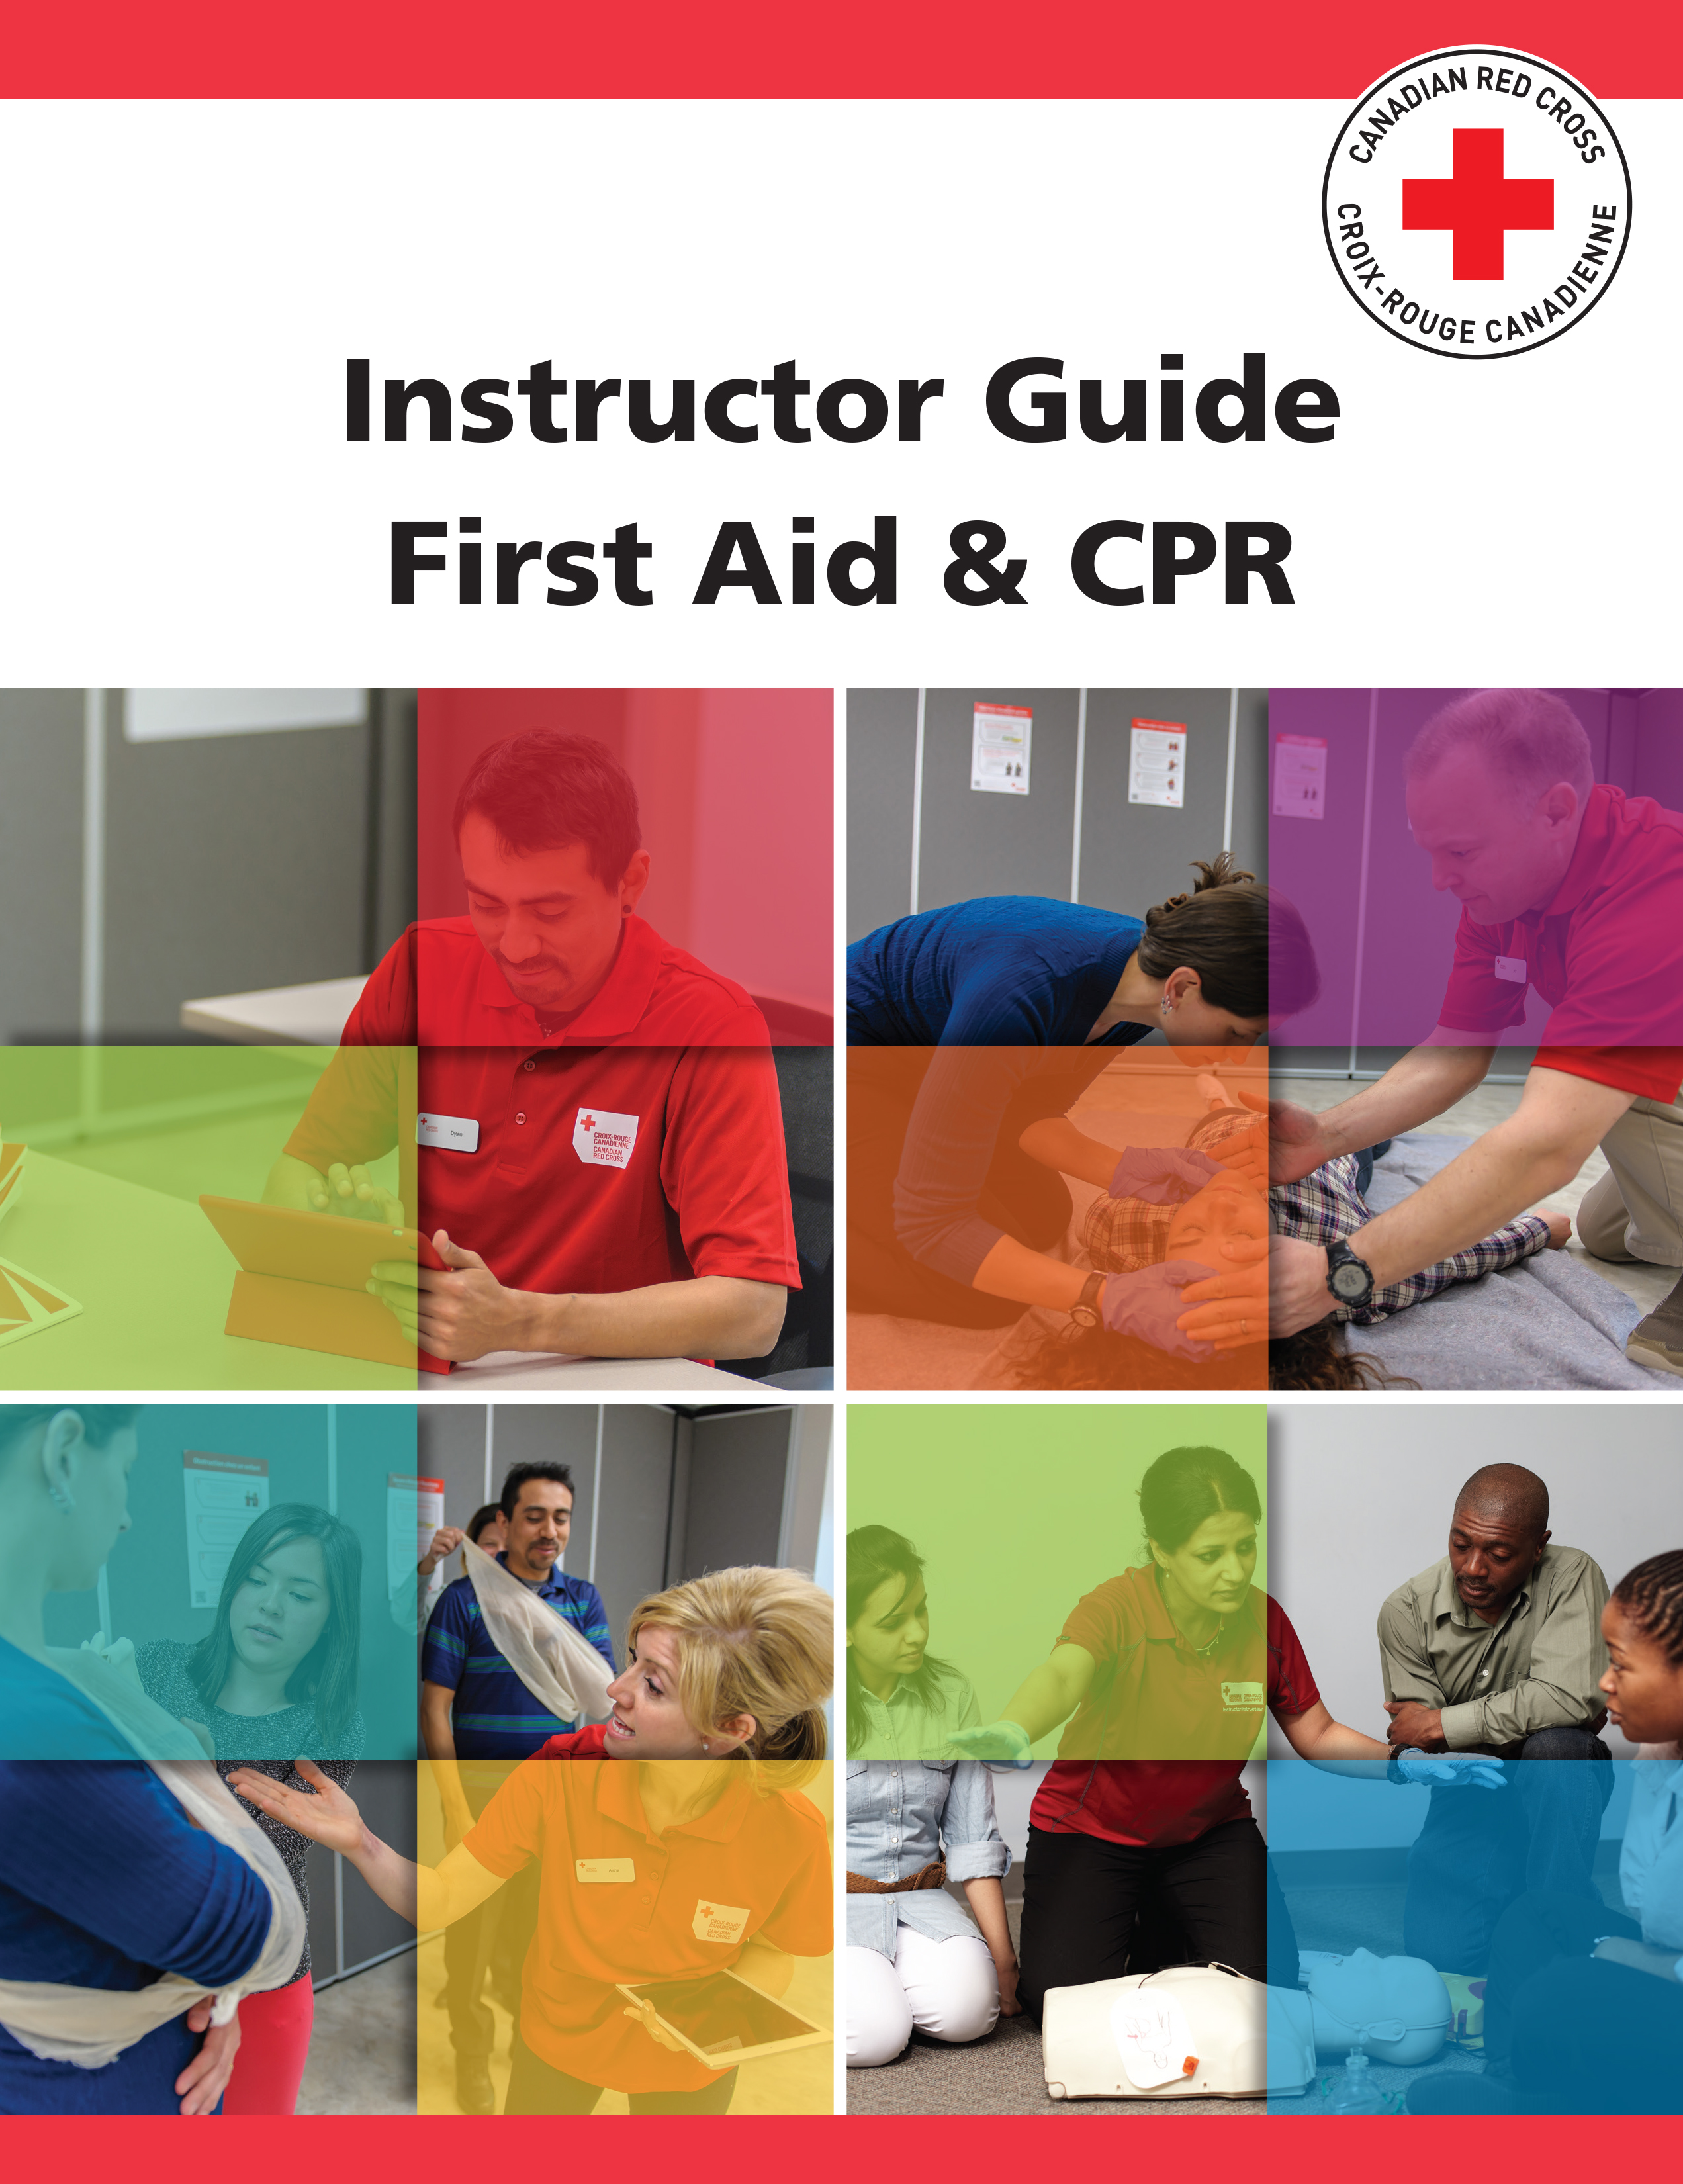 First Aid Course Materials for First Aid & CPR Instructor